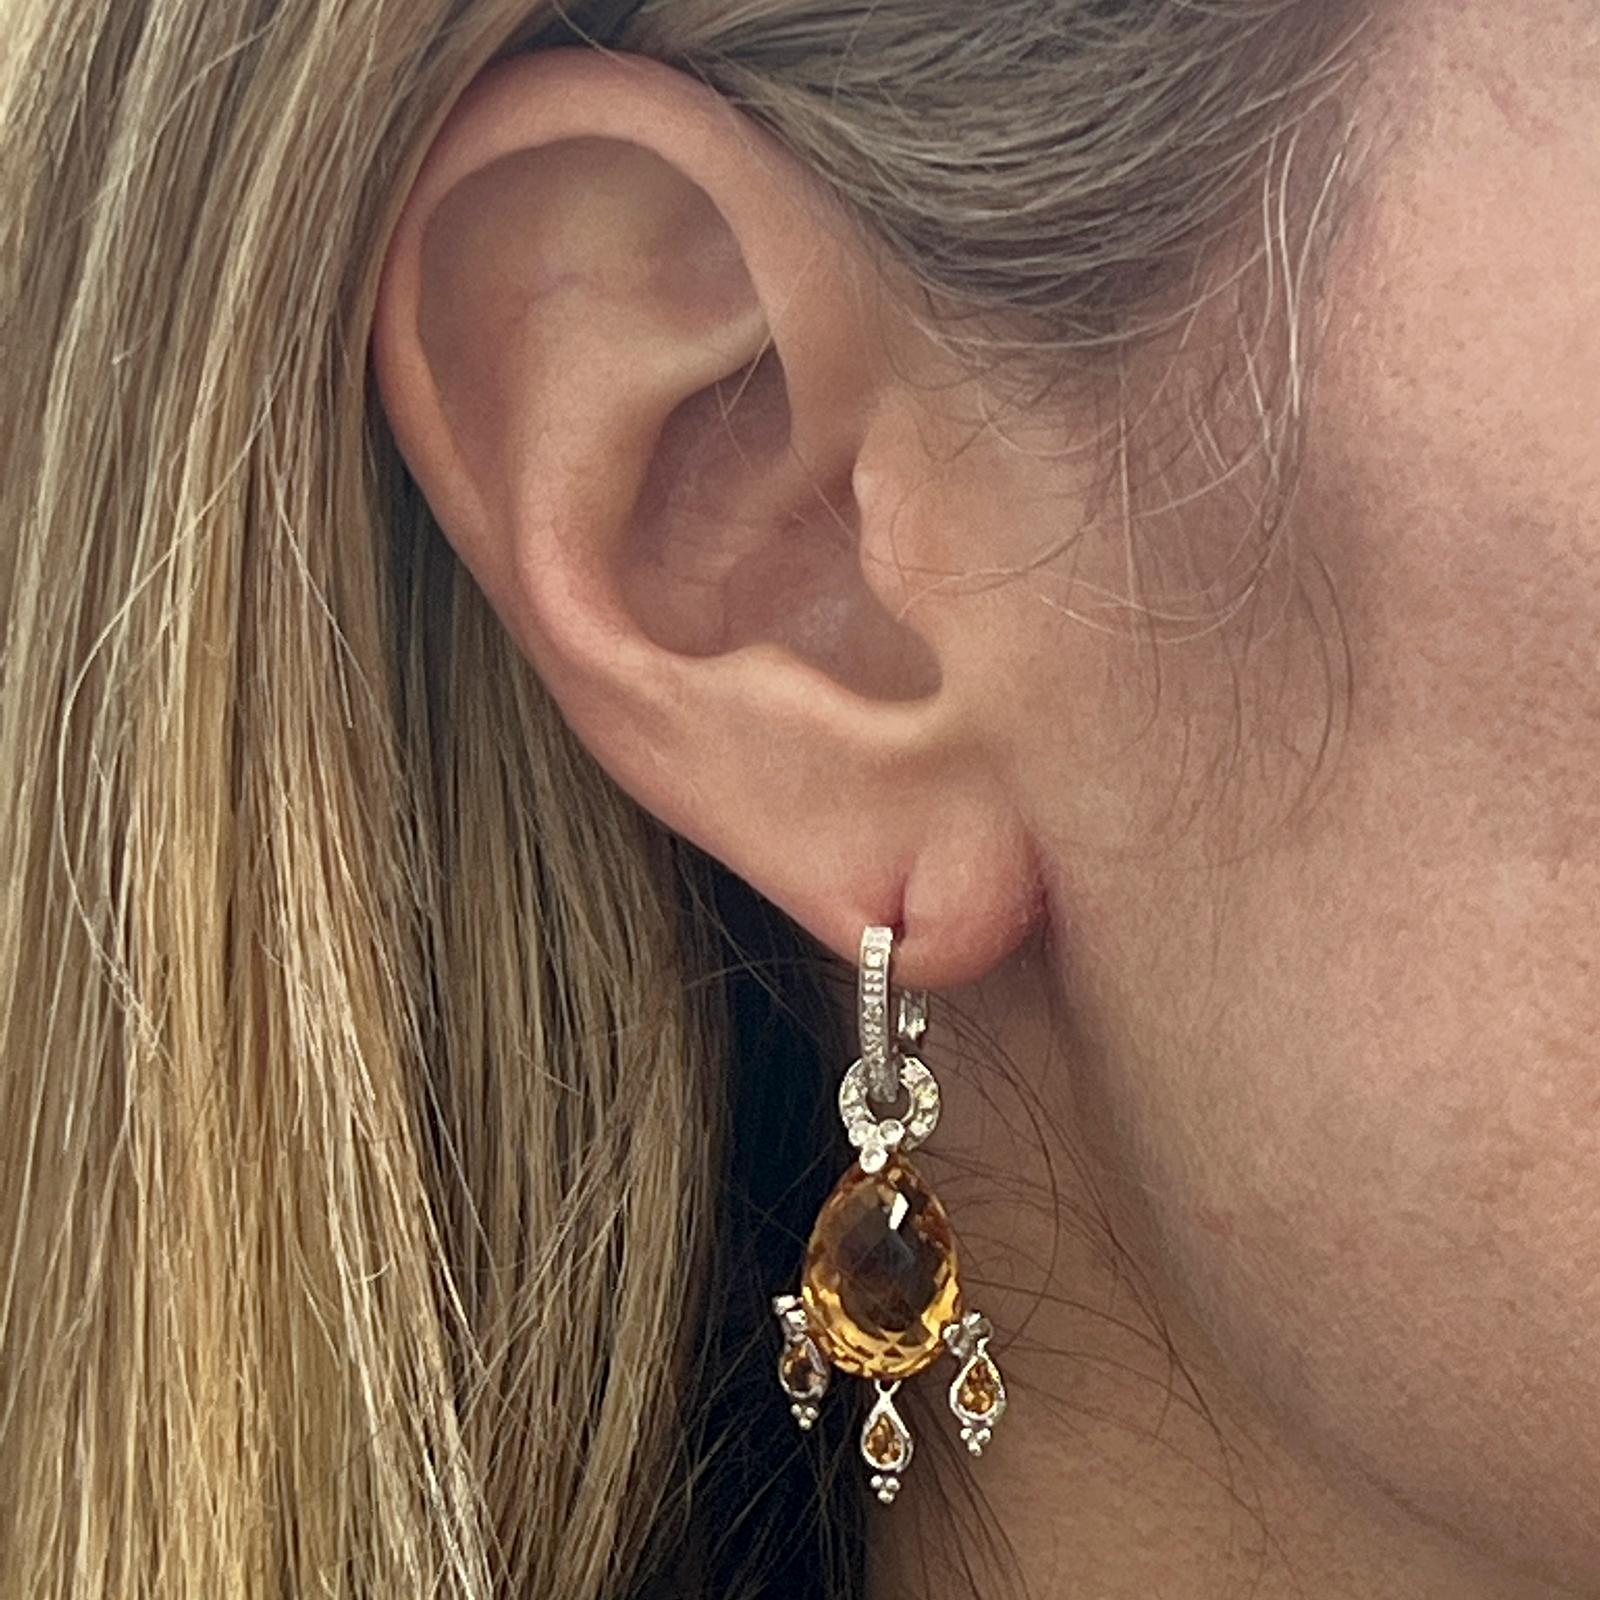 Beautiful citrine and diamond dangle earrings crafted in 14 karat white gold. The earrings feature briolette faceted citrine gemstones and 38 round brilliant cut diamonds weighing approximately .20 CTW. The earrings measures 1.50 x .50 inches, and